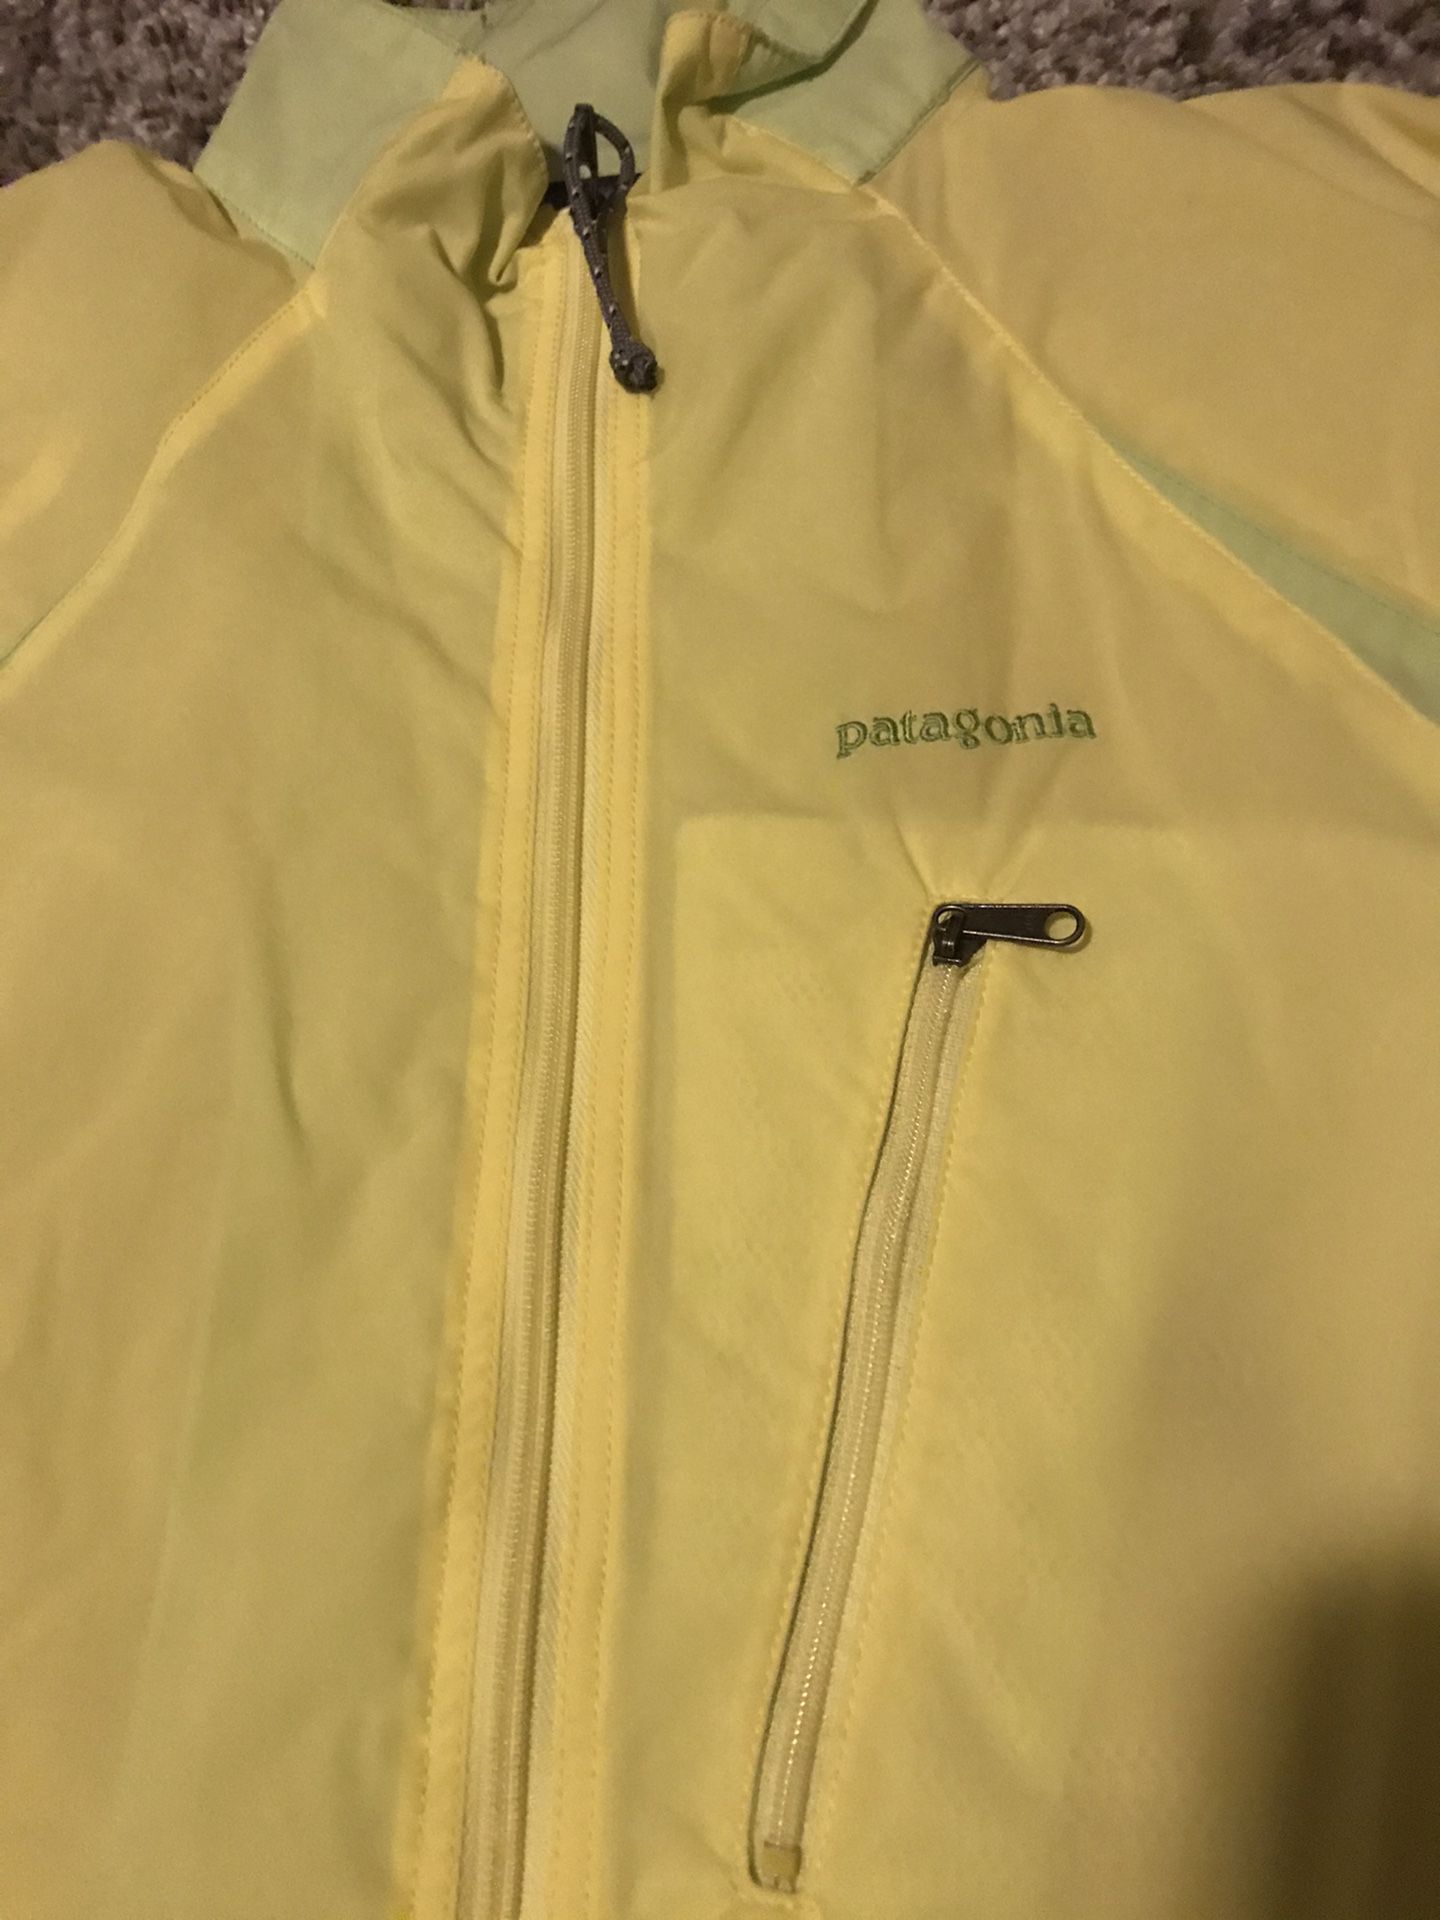 Patagonia Light-Weight Jacket for Sale in Charlotte, NC - OfferUp